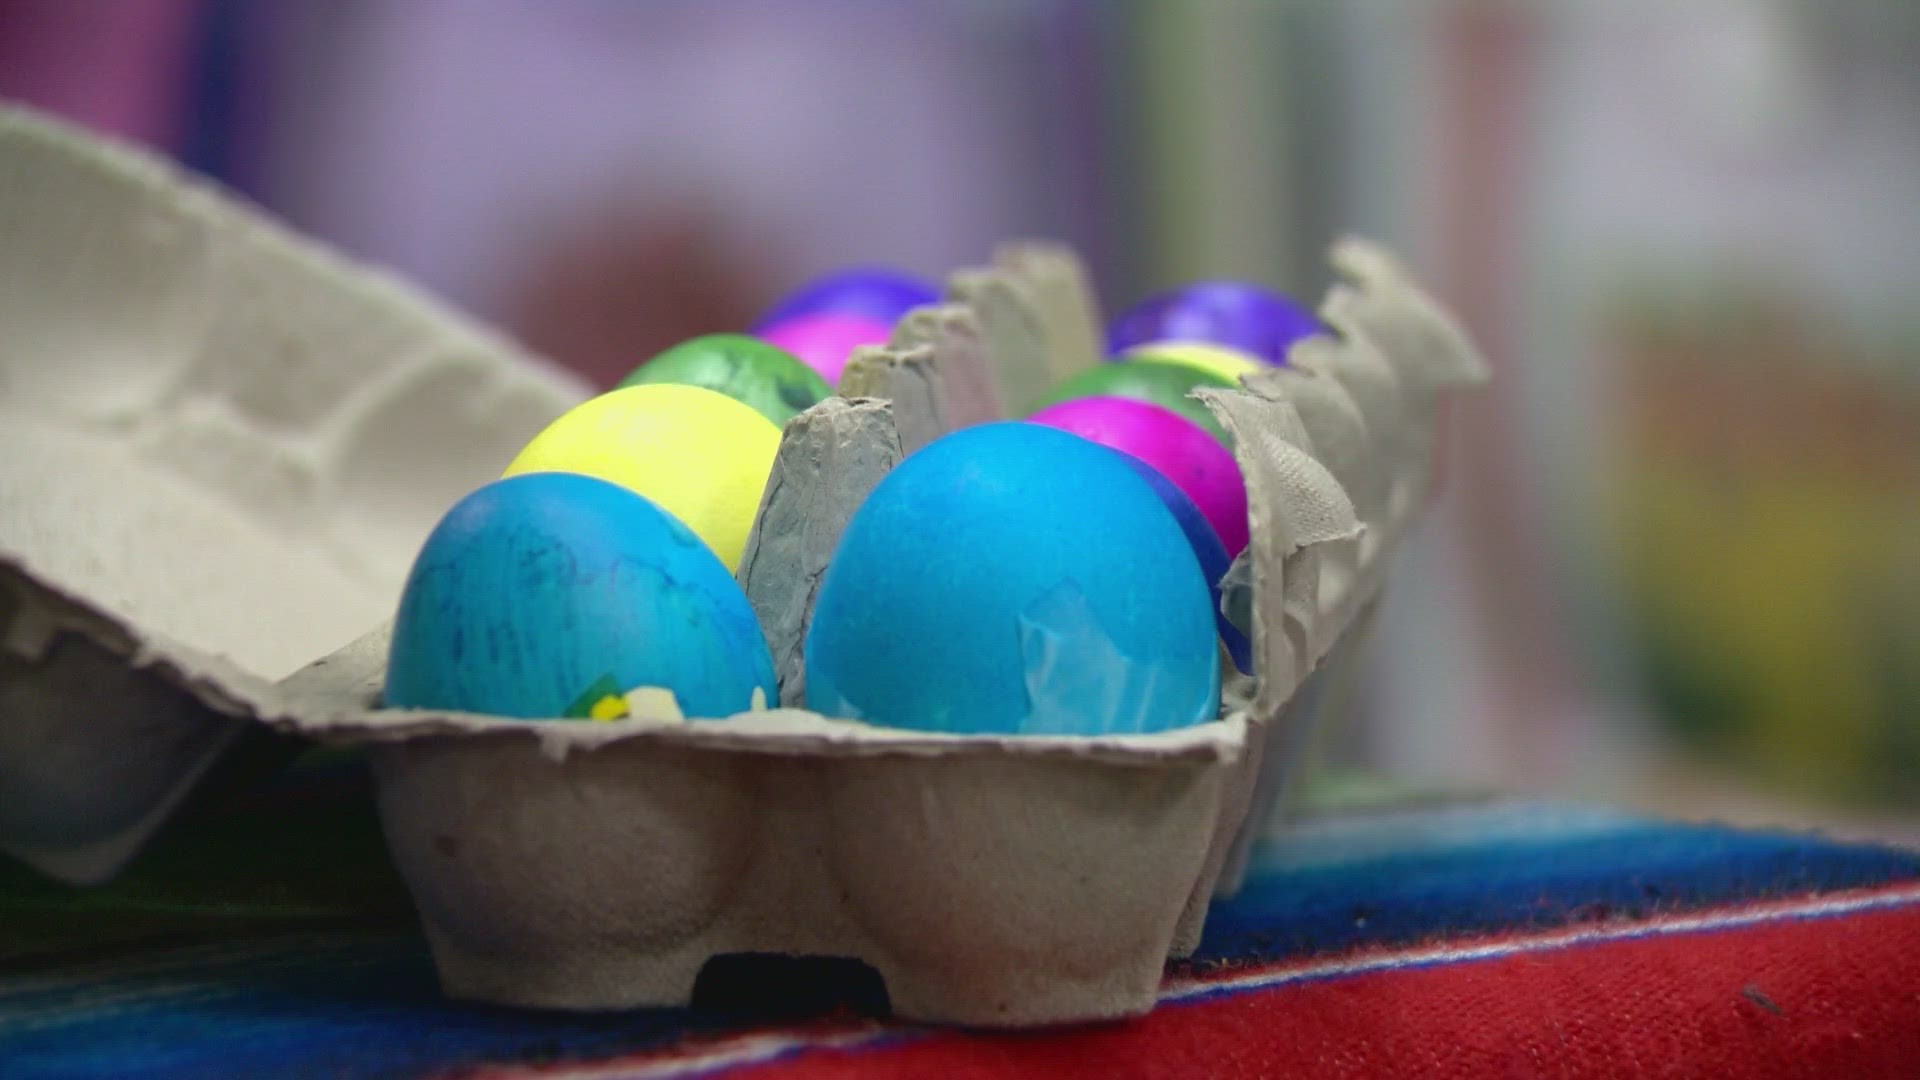 The cost of eggs is falling, but many stores and community organizations are scaling back ahead of Easter and Fiesta.